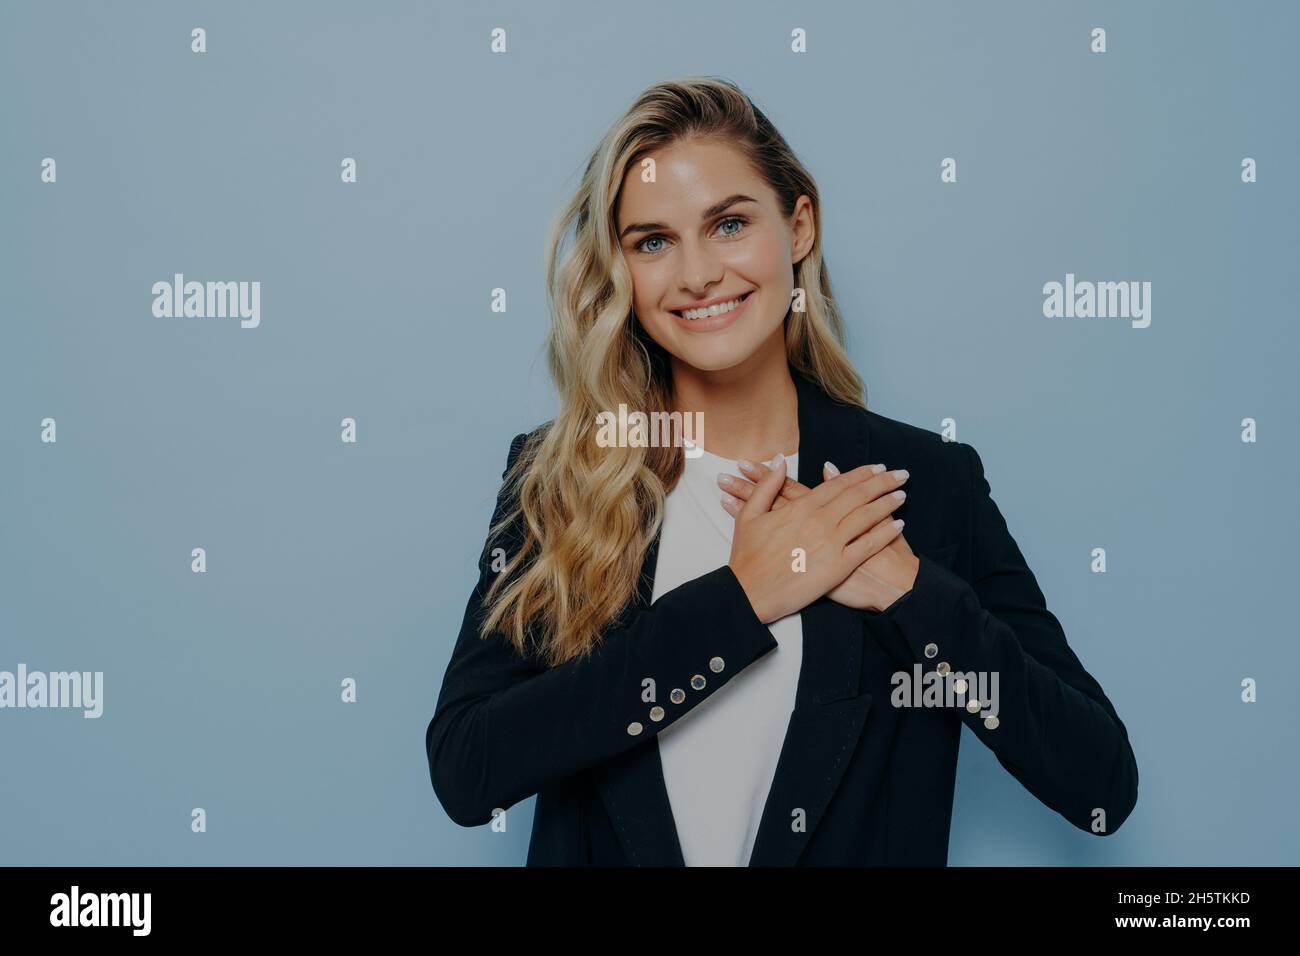 Cheerful blonde girl showing her appreciation and gratitude by placing hands on chest Stock Photo